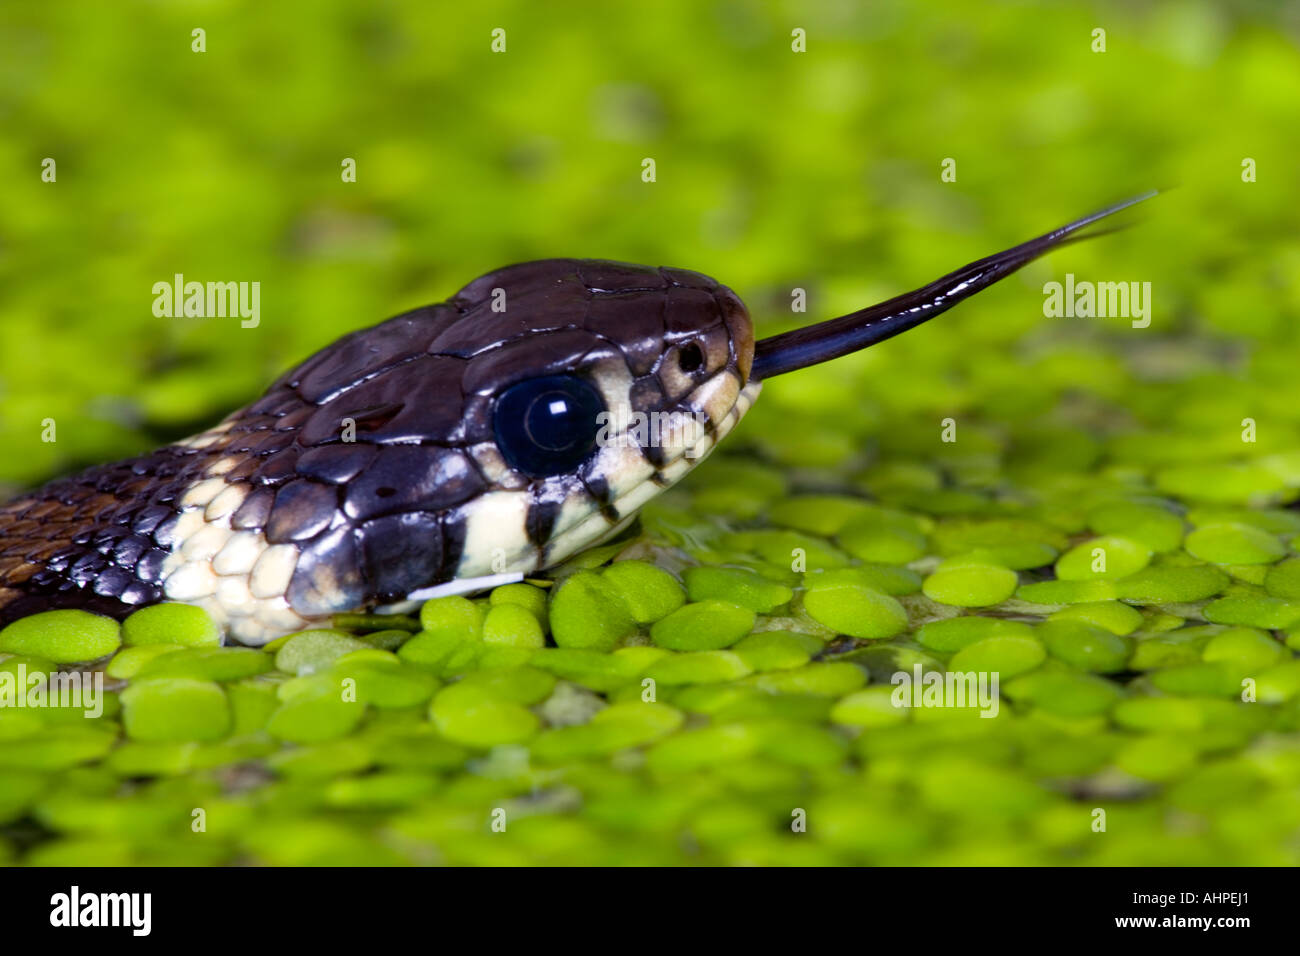 Small young Grass snake Natrix natrix swimming in garden pond with tongue out Potton Bedfordshire Stock Photo